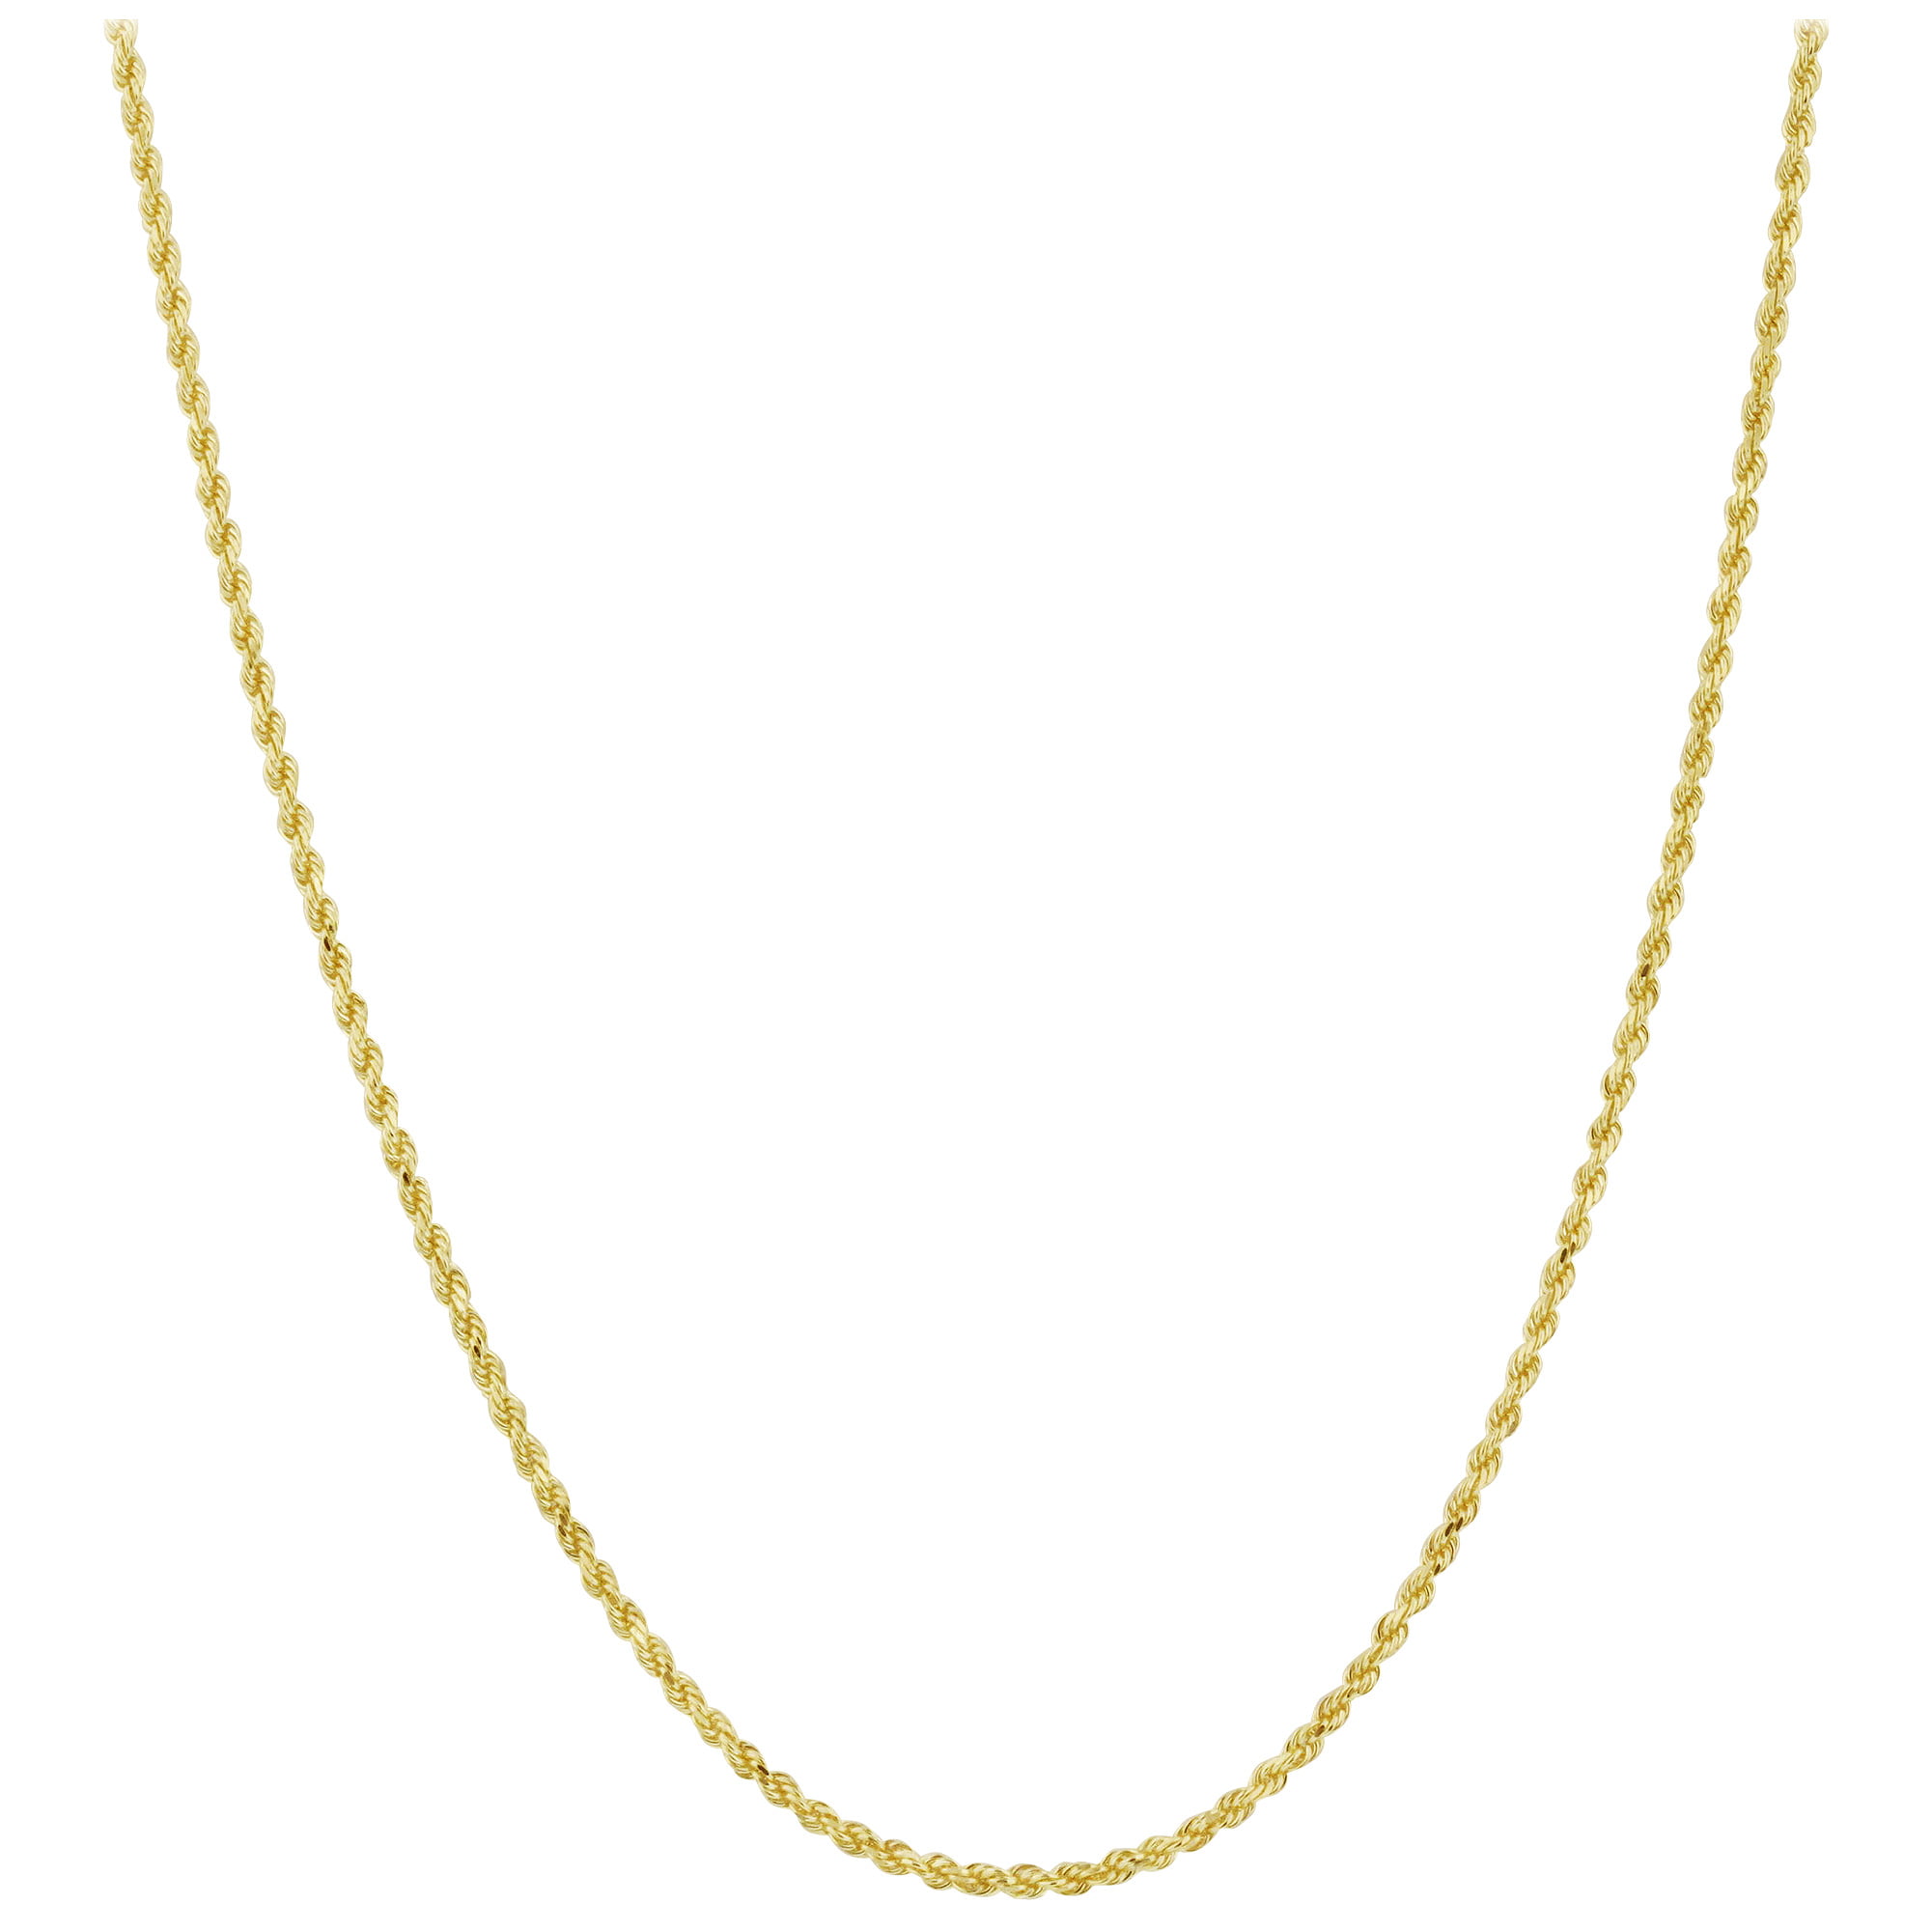 18 in Length 14 kt Yellow Gold 14k 1.5mm Diamond-Cut Extra-Light Rope Chain